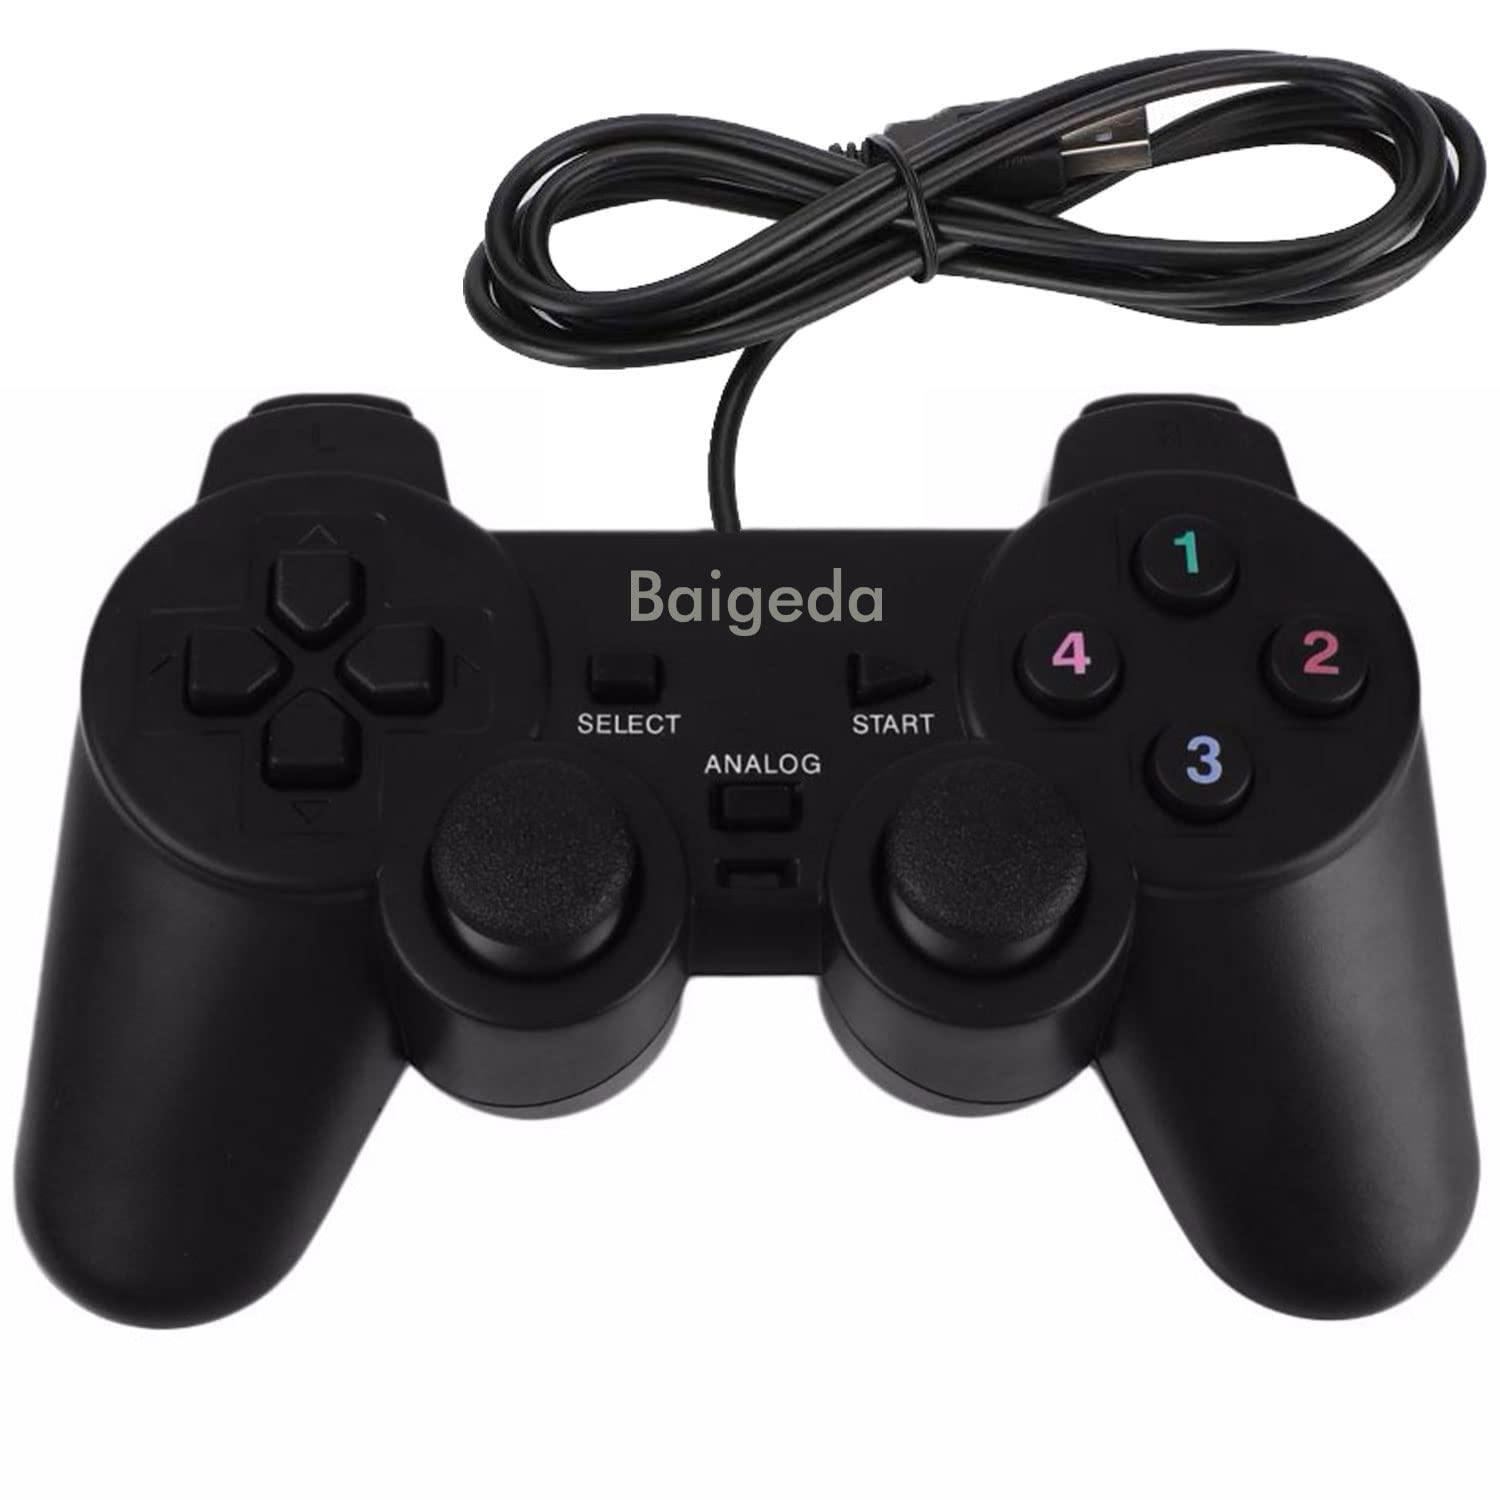 baigeda-wired-game-controller-how-to-connect